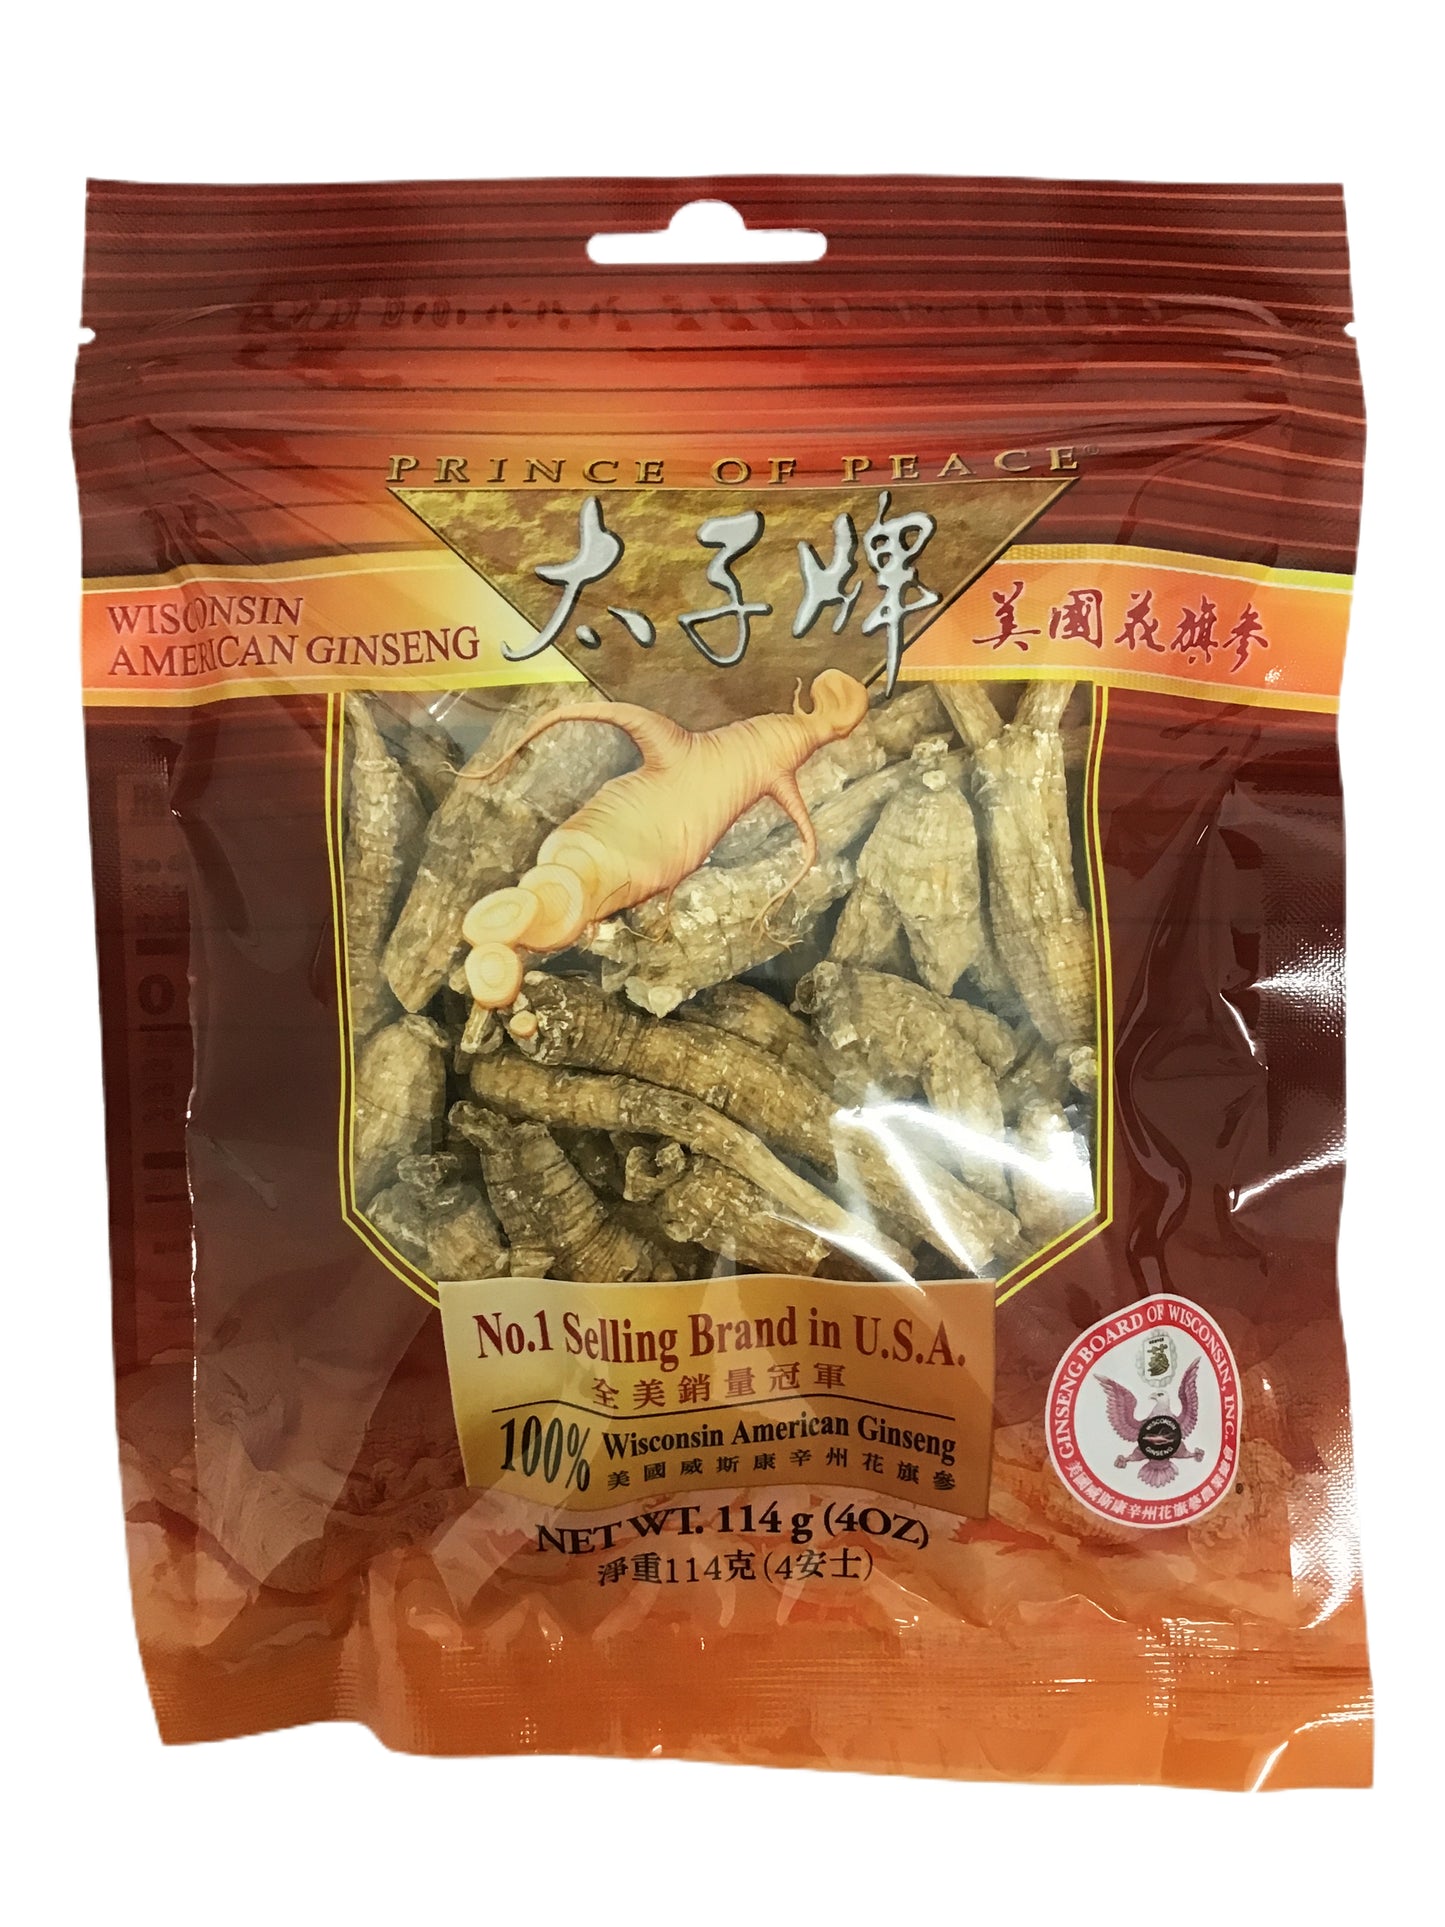 Prince Of Peace Wisconsin American Ginseng 太子牌 美国花旗参 4oz